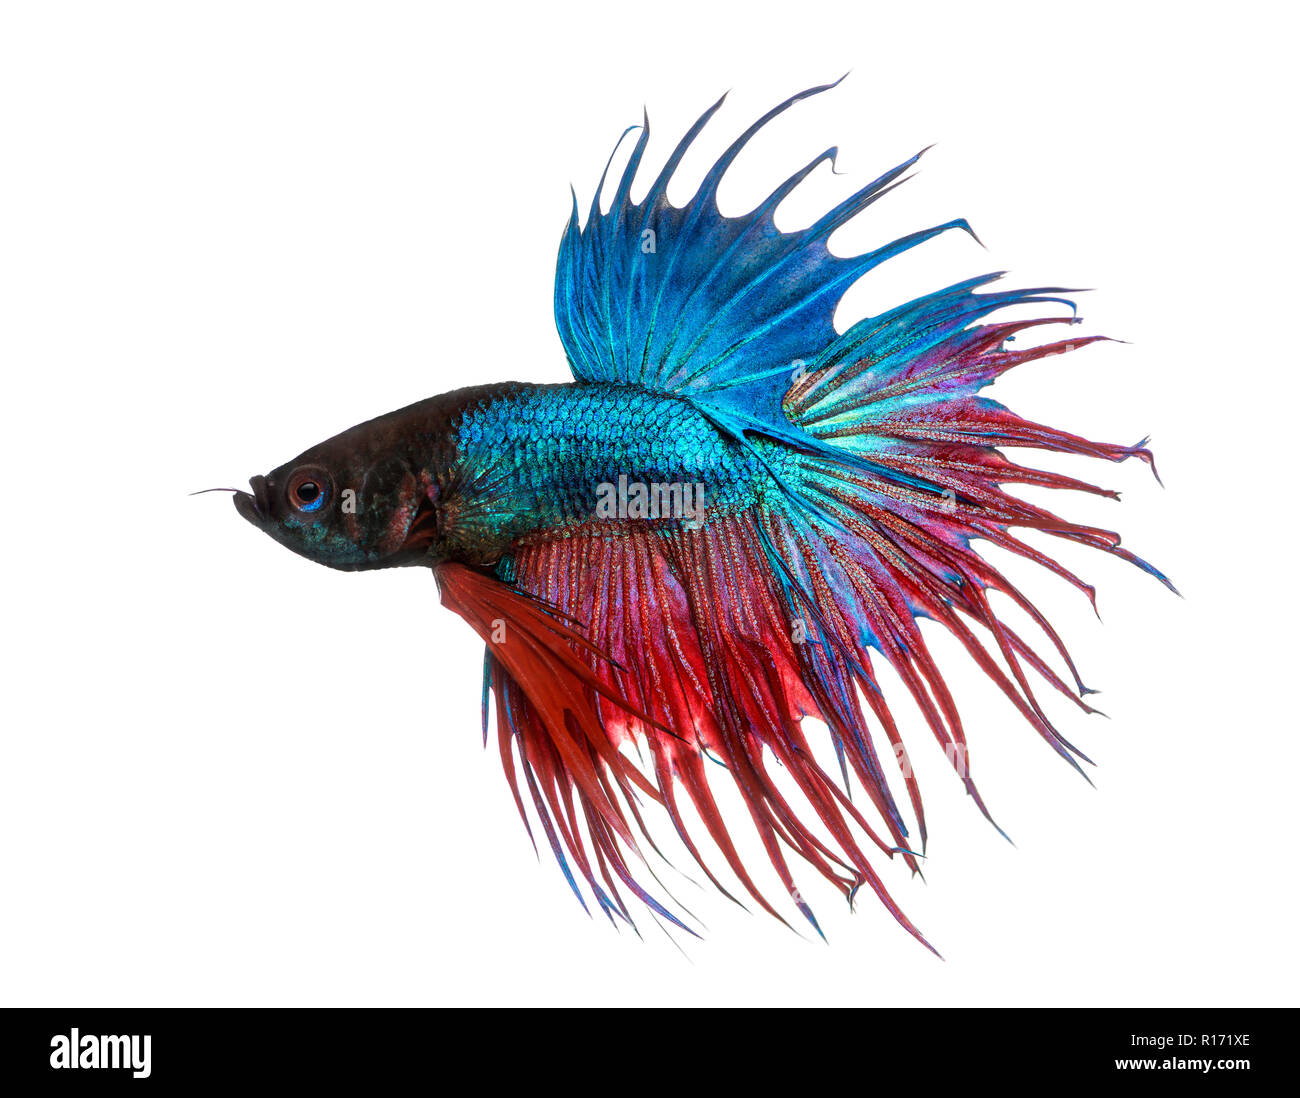 king crowntail betta